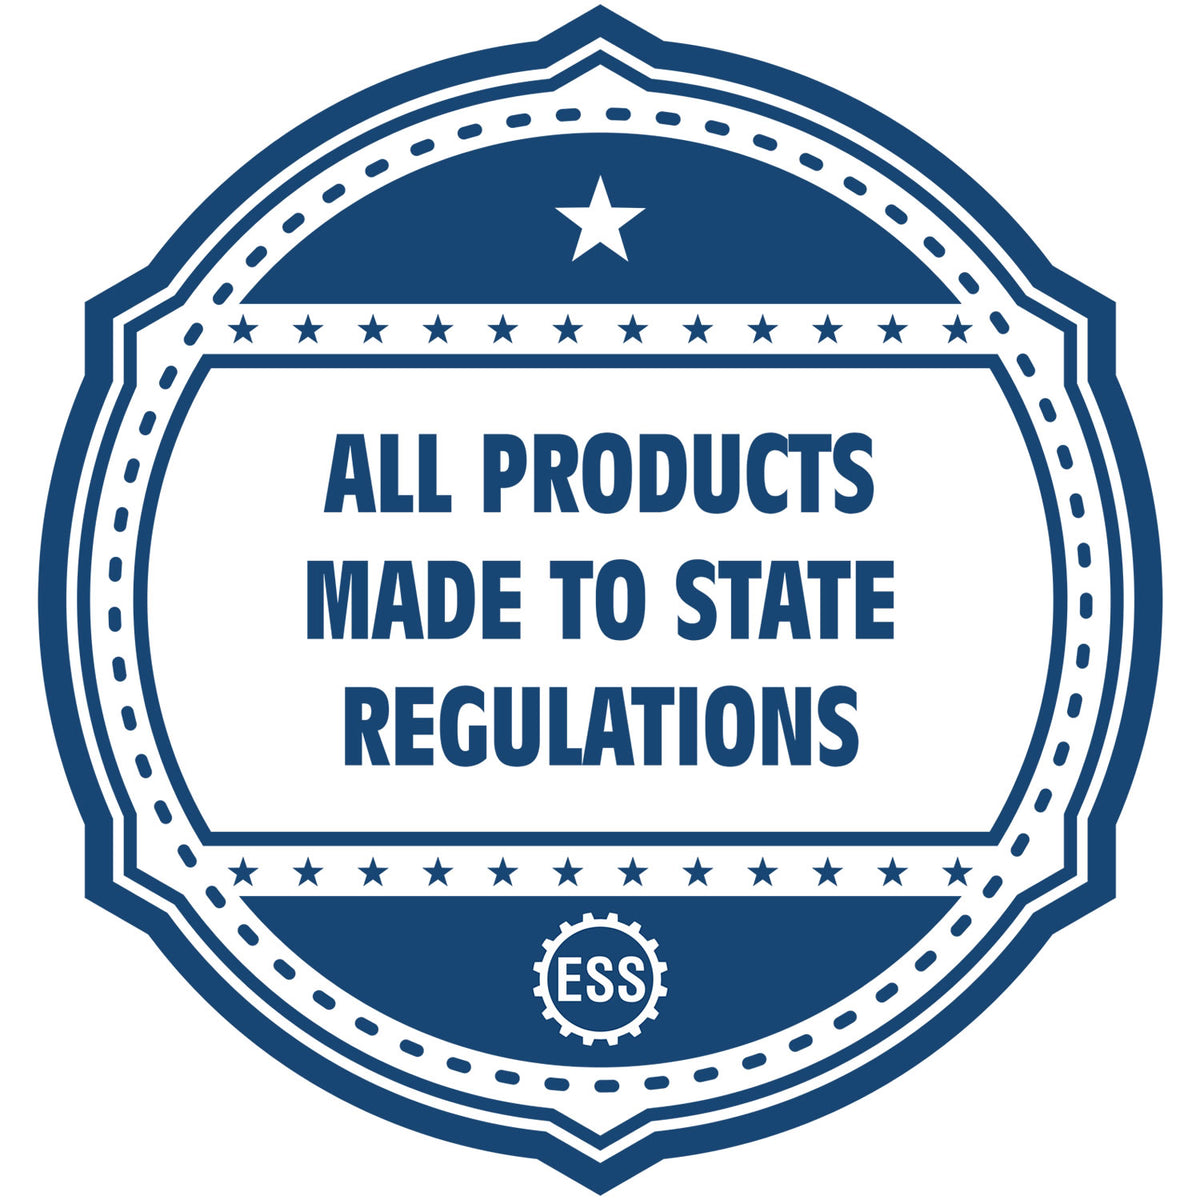 An icon or badge element for the Heavy Duty Cast Iron Virginia Engineer Seal Embosser showing that this product is made in compliance with state regulations.